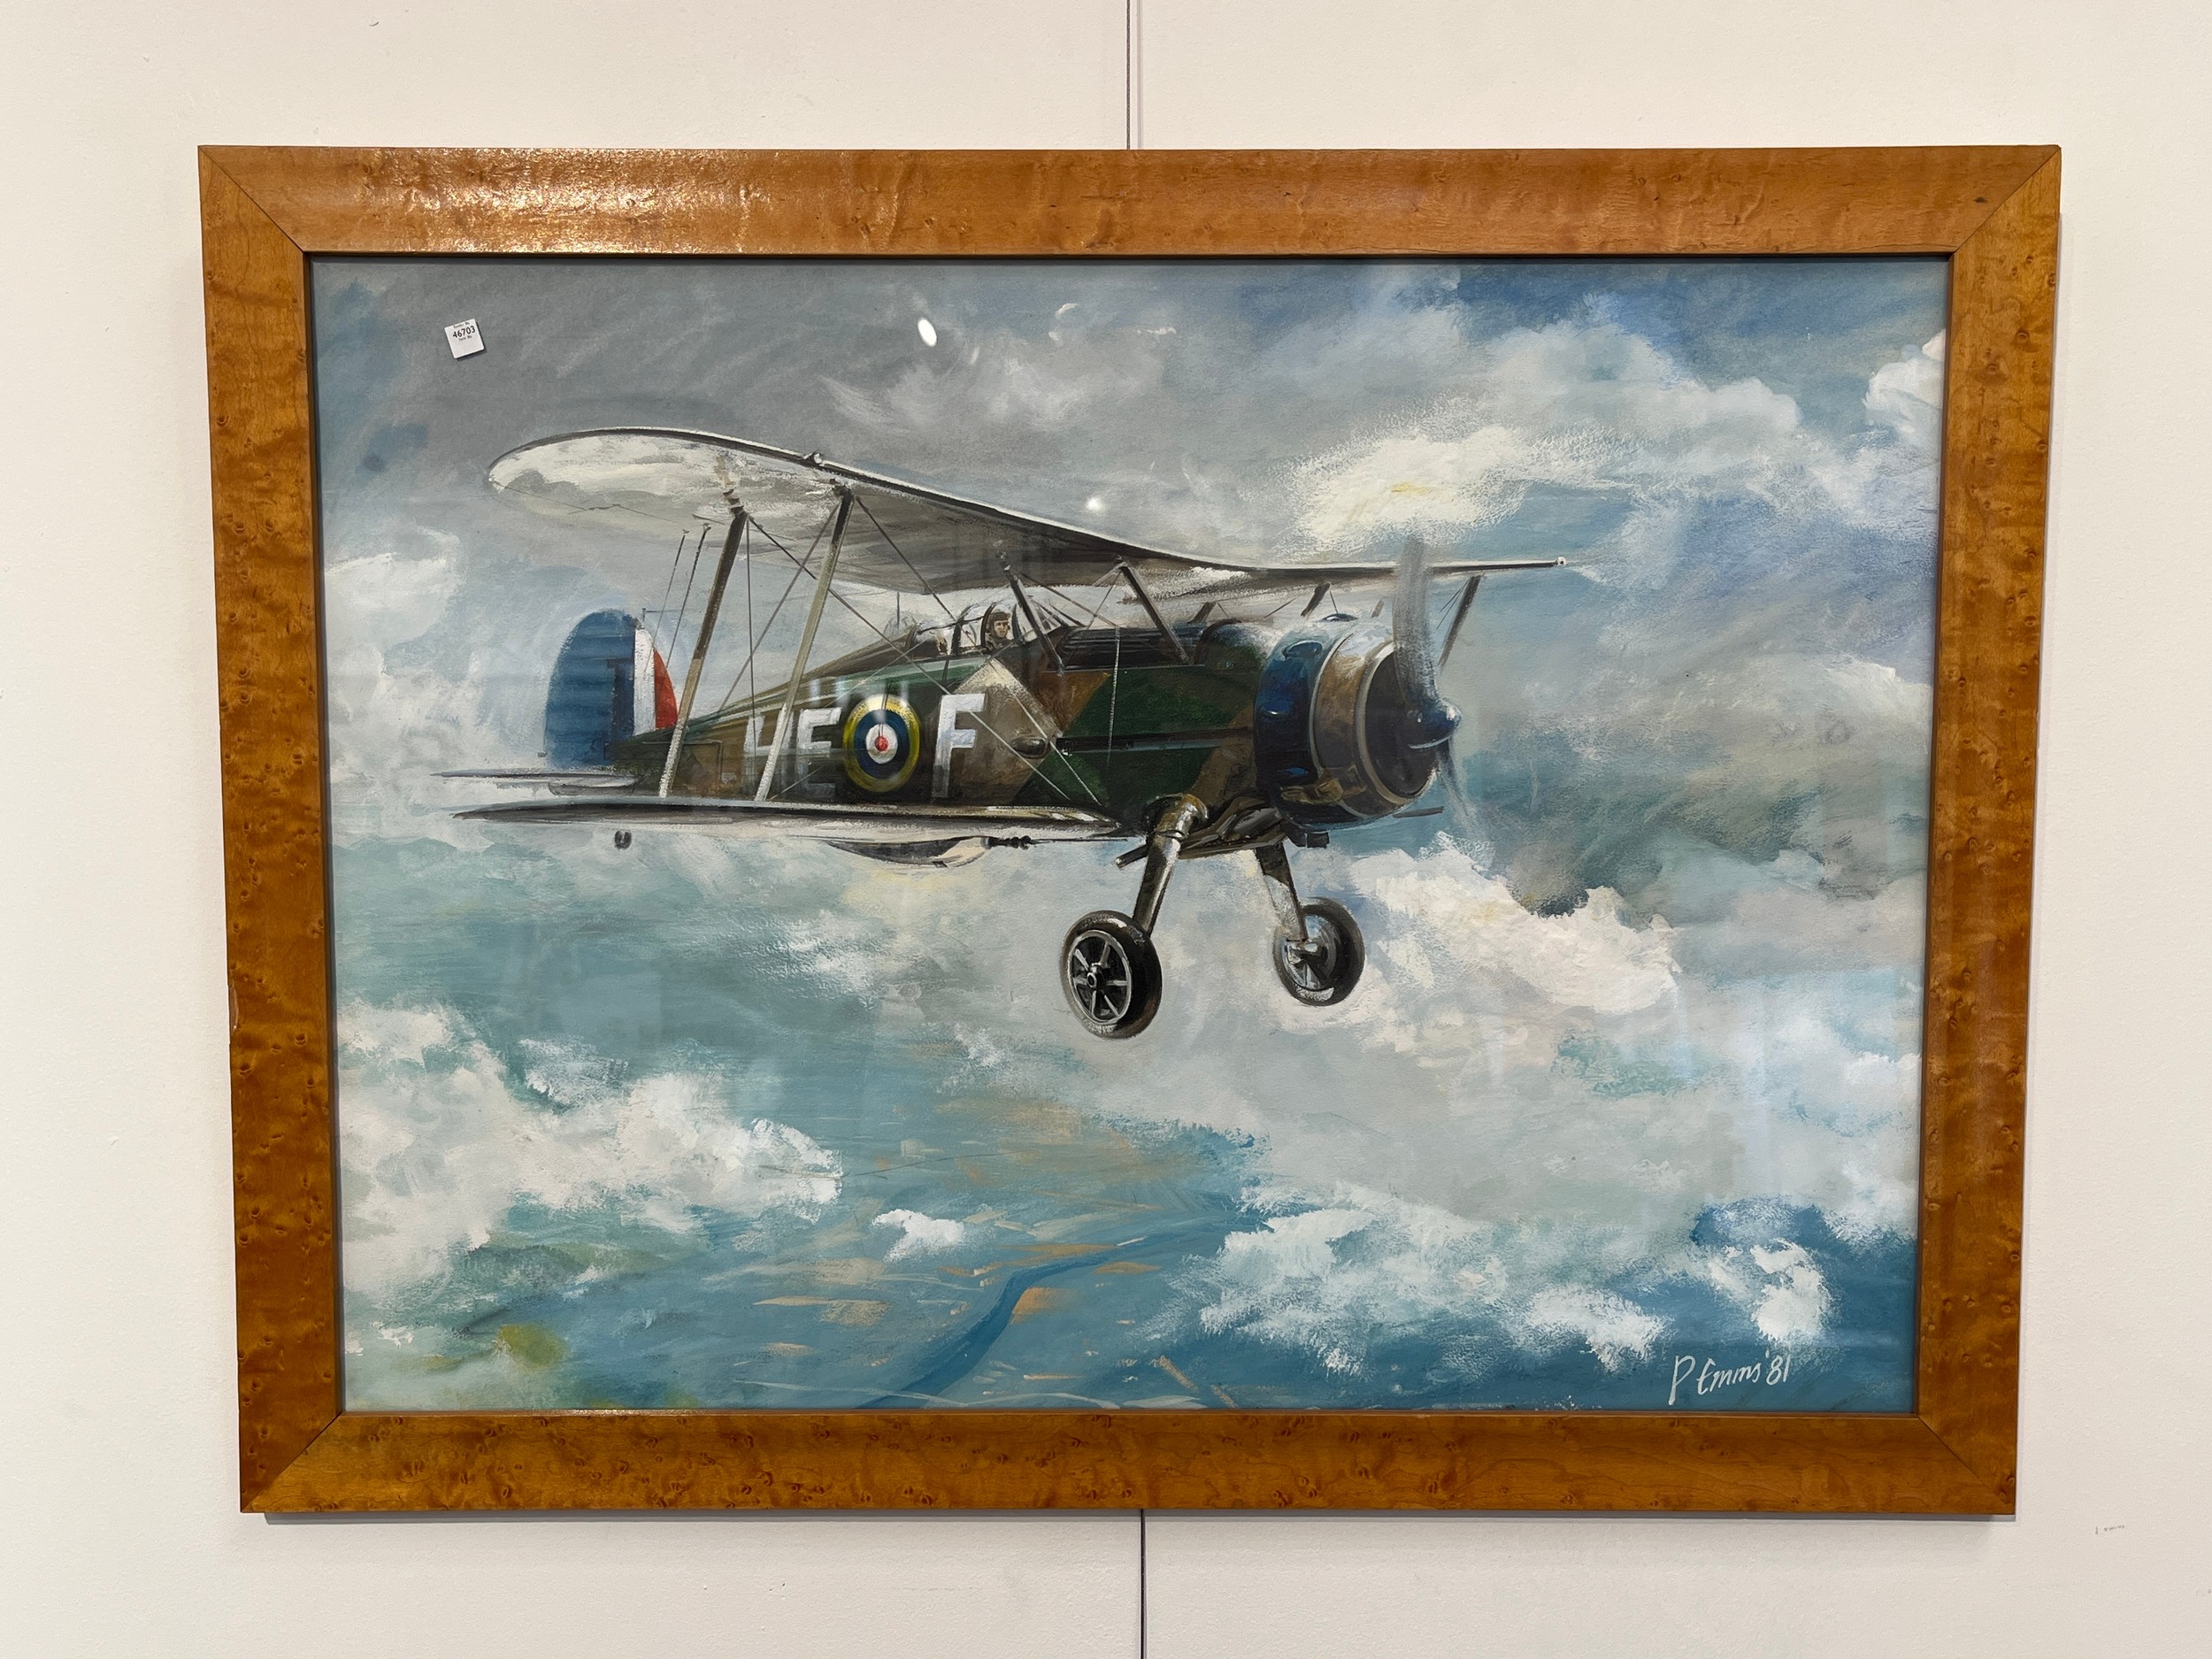 P. EMMS (XX): An oil of biplane in flight, framed and glazed